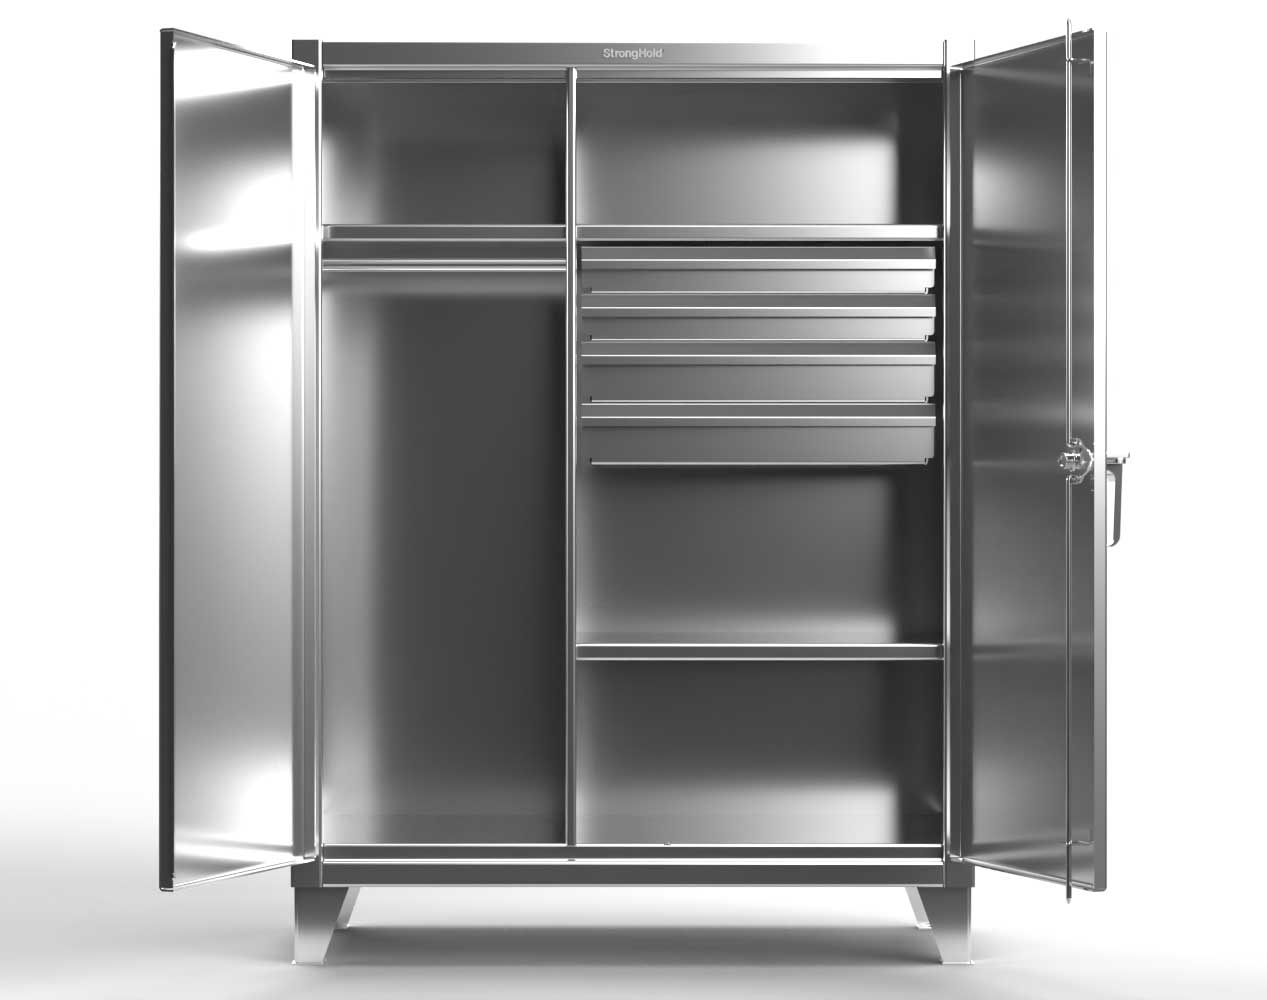 Extreme Duty 12 GA Stainless Steel Uniform Cabinet with 4 Drawers, 3 Shelves - 48 In. W x 24 In. D x 66 In. H